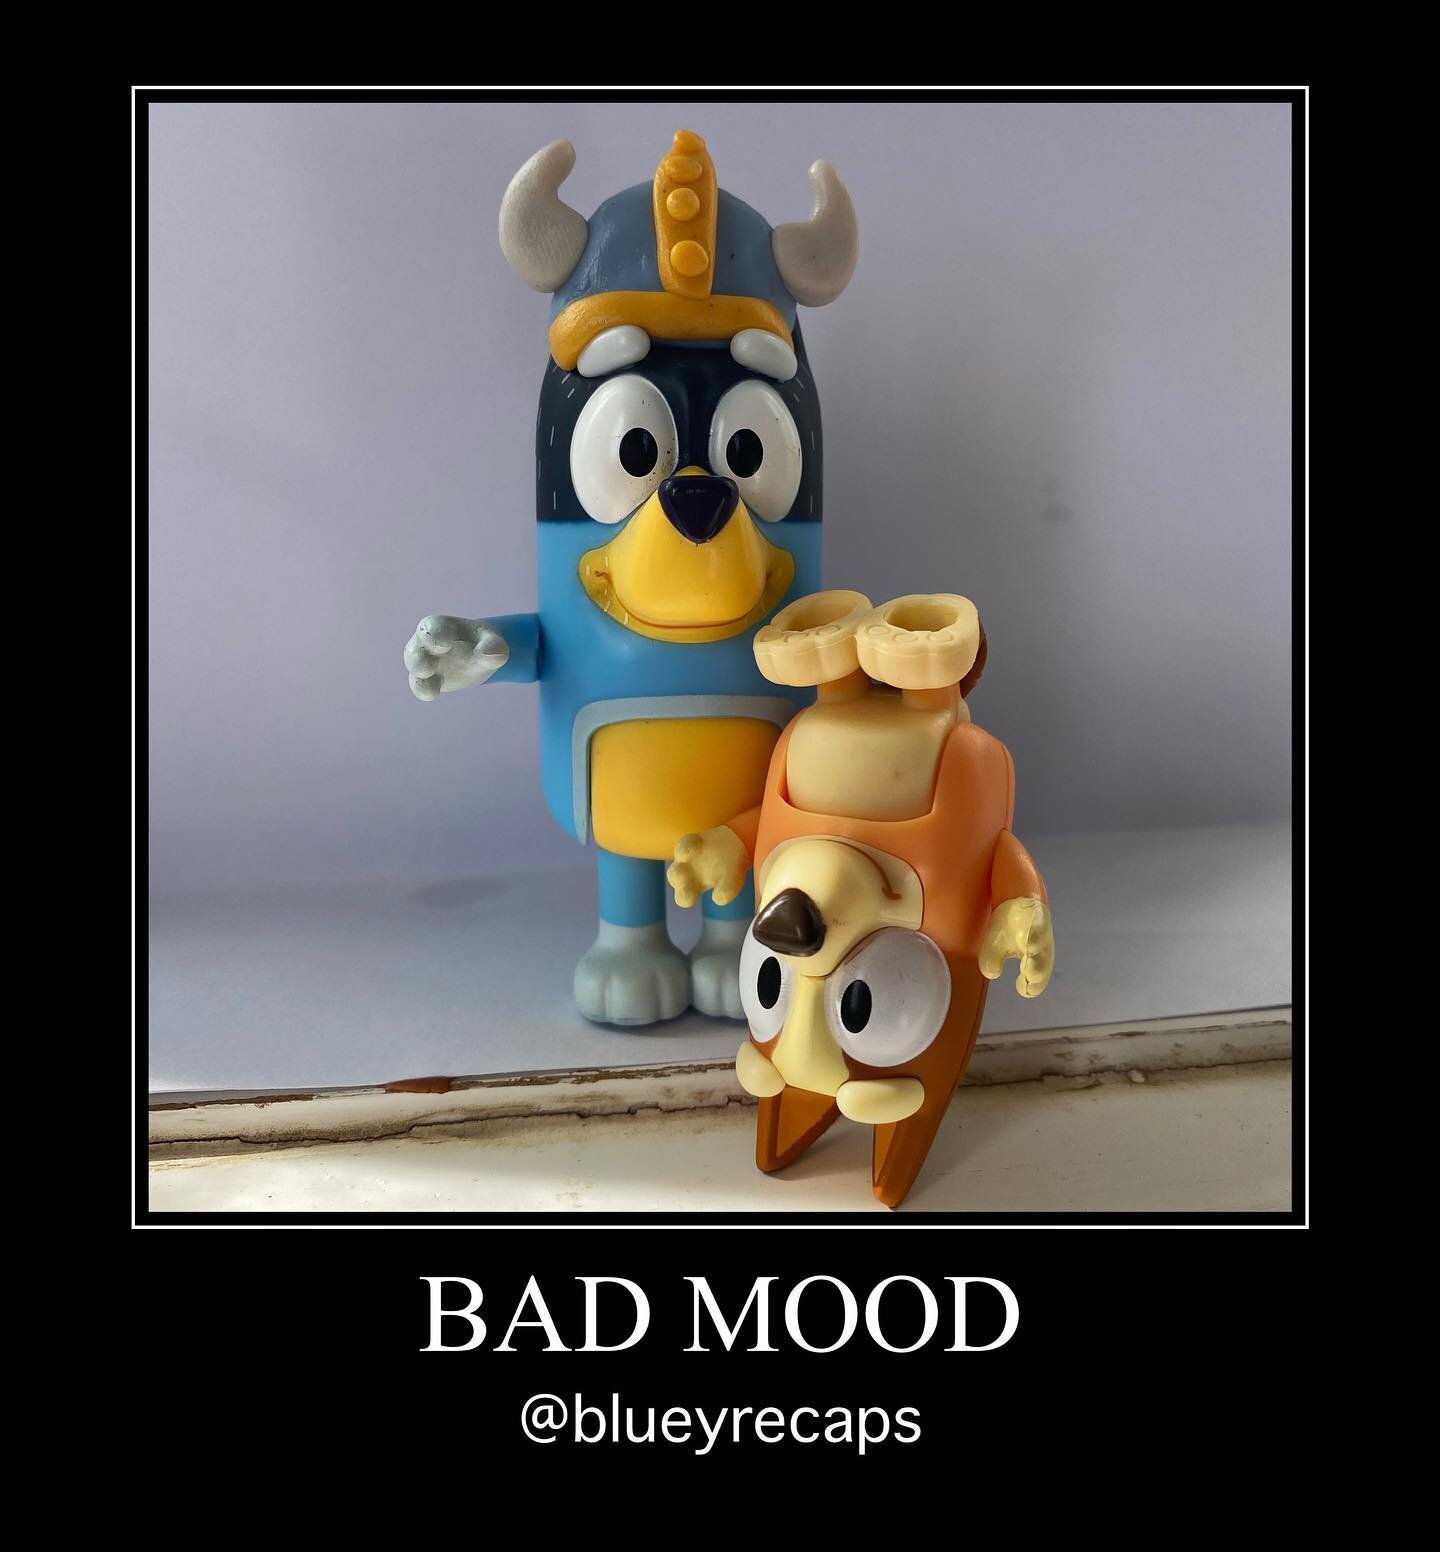 Bluey Recap: Bad Mood (#2.43)
#bestbits: Bingo&rsquo;s giggles
#lifelesson: you can always get out of a bad mood, and kids are NOT their behaviours 
.
Bingo runs giggling to hide behind a couch and eat a biscuit she&rsquo;s stolen... unfortunately fo